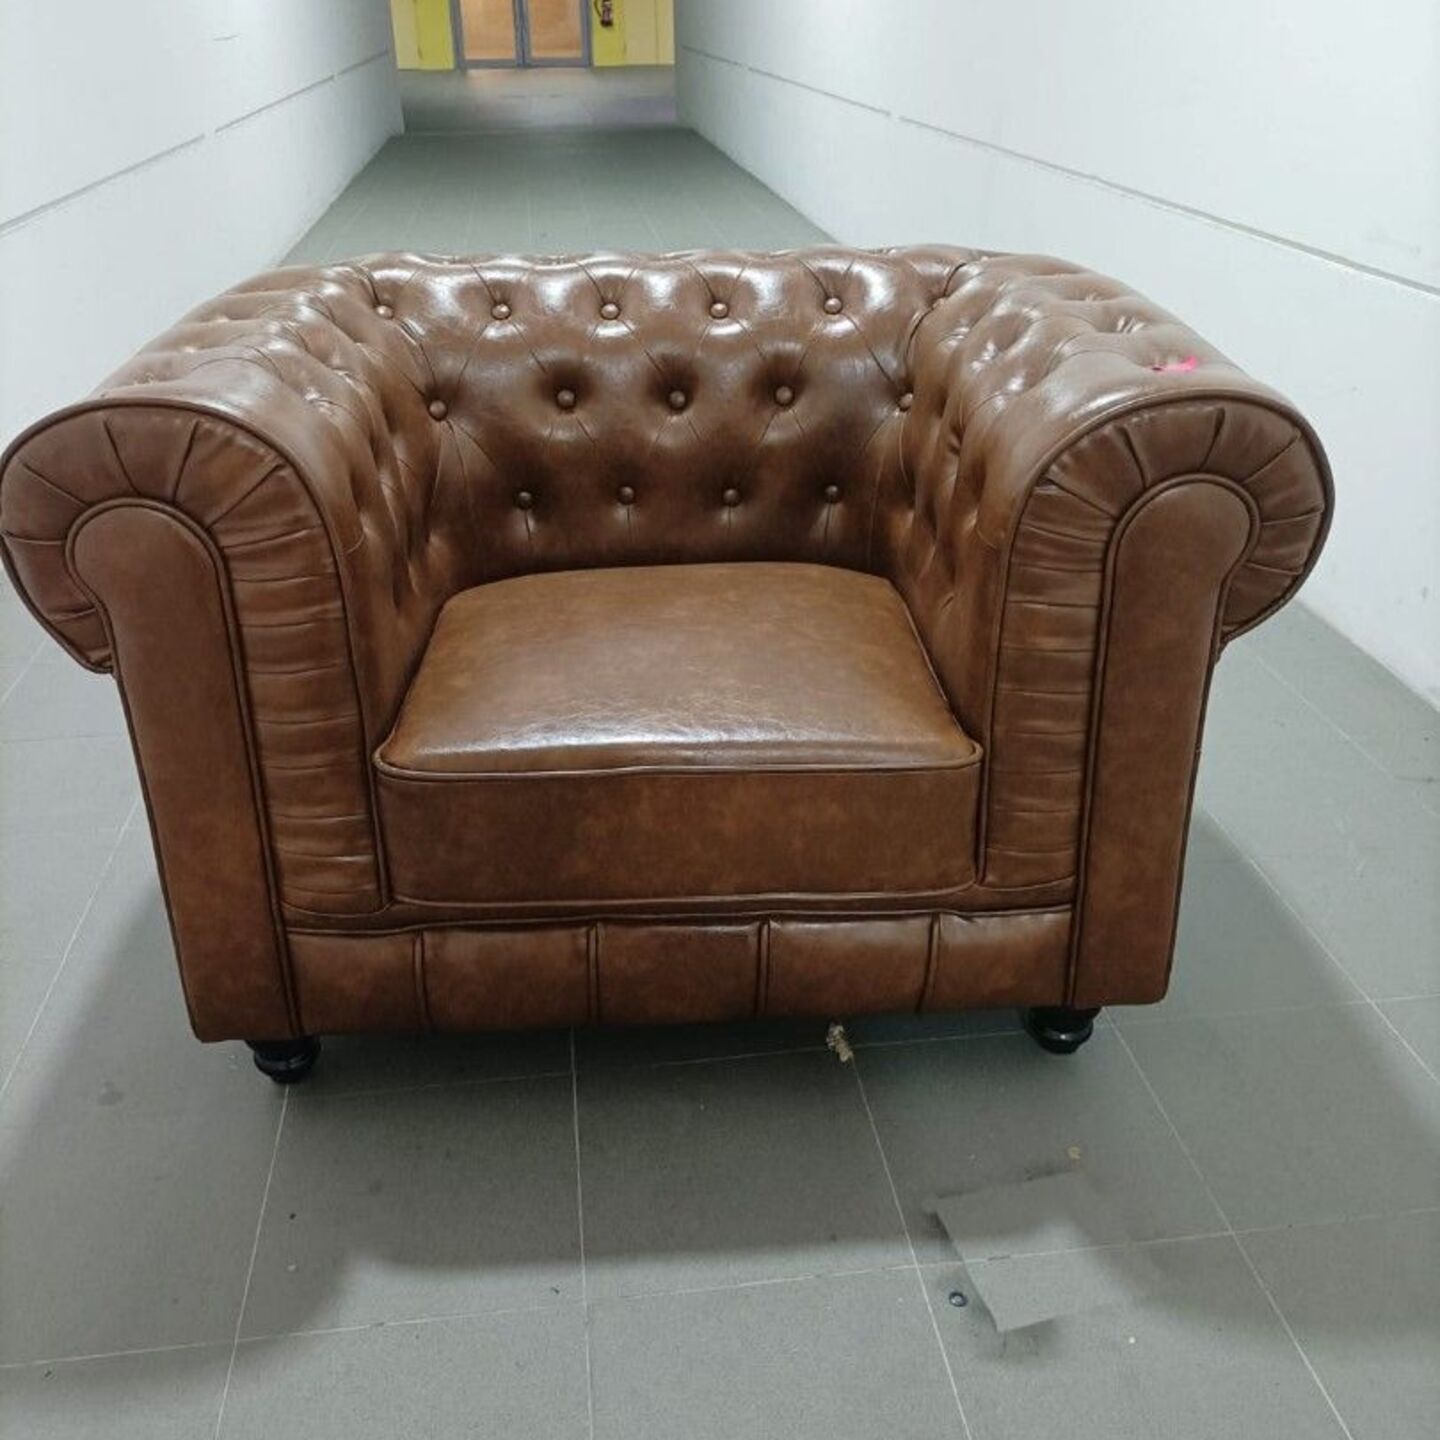 PRE ORDER SALVADO II Single Armchair Chesterfield in CAMEL BROWN PU - estimated delivery before end Dec 2023